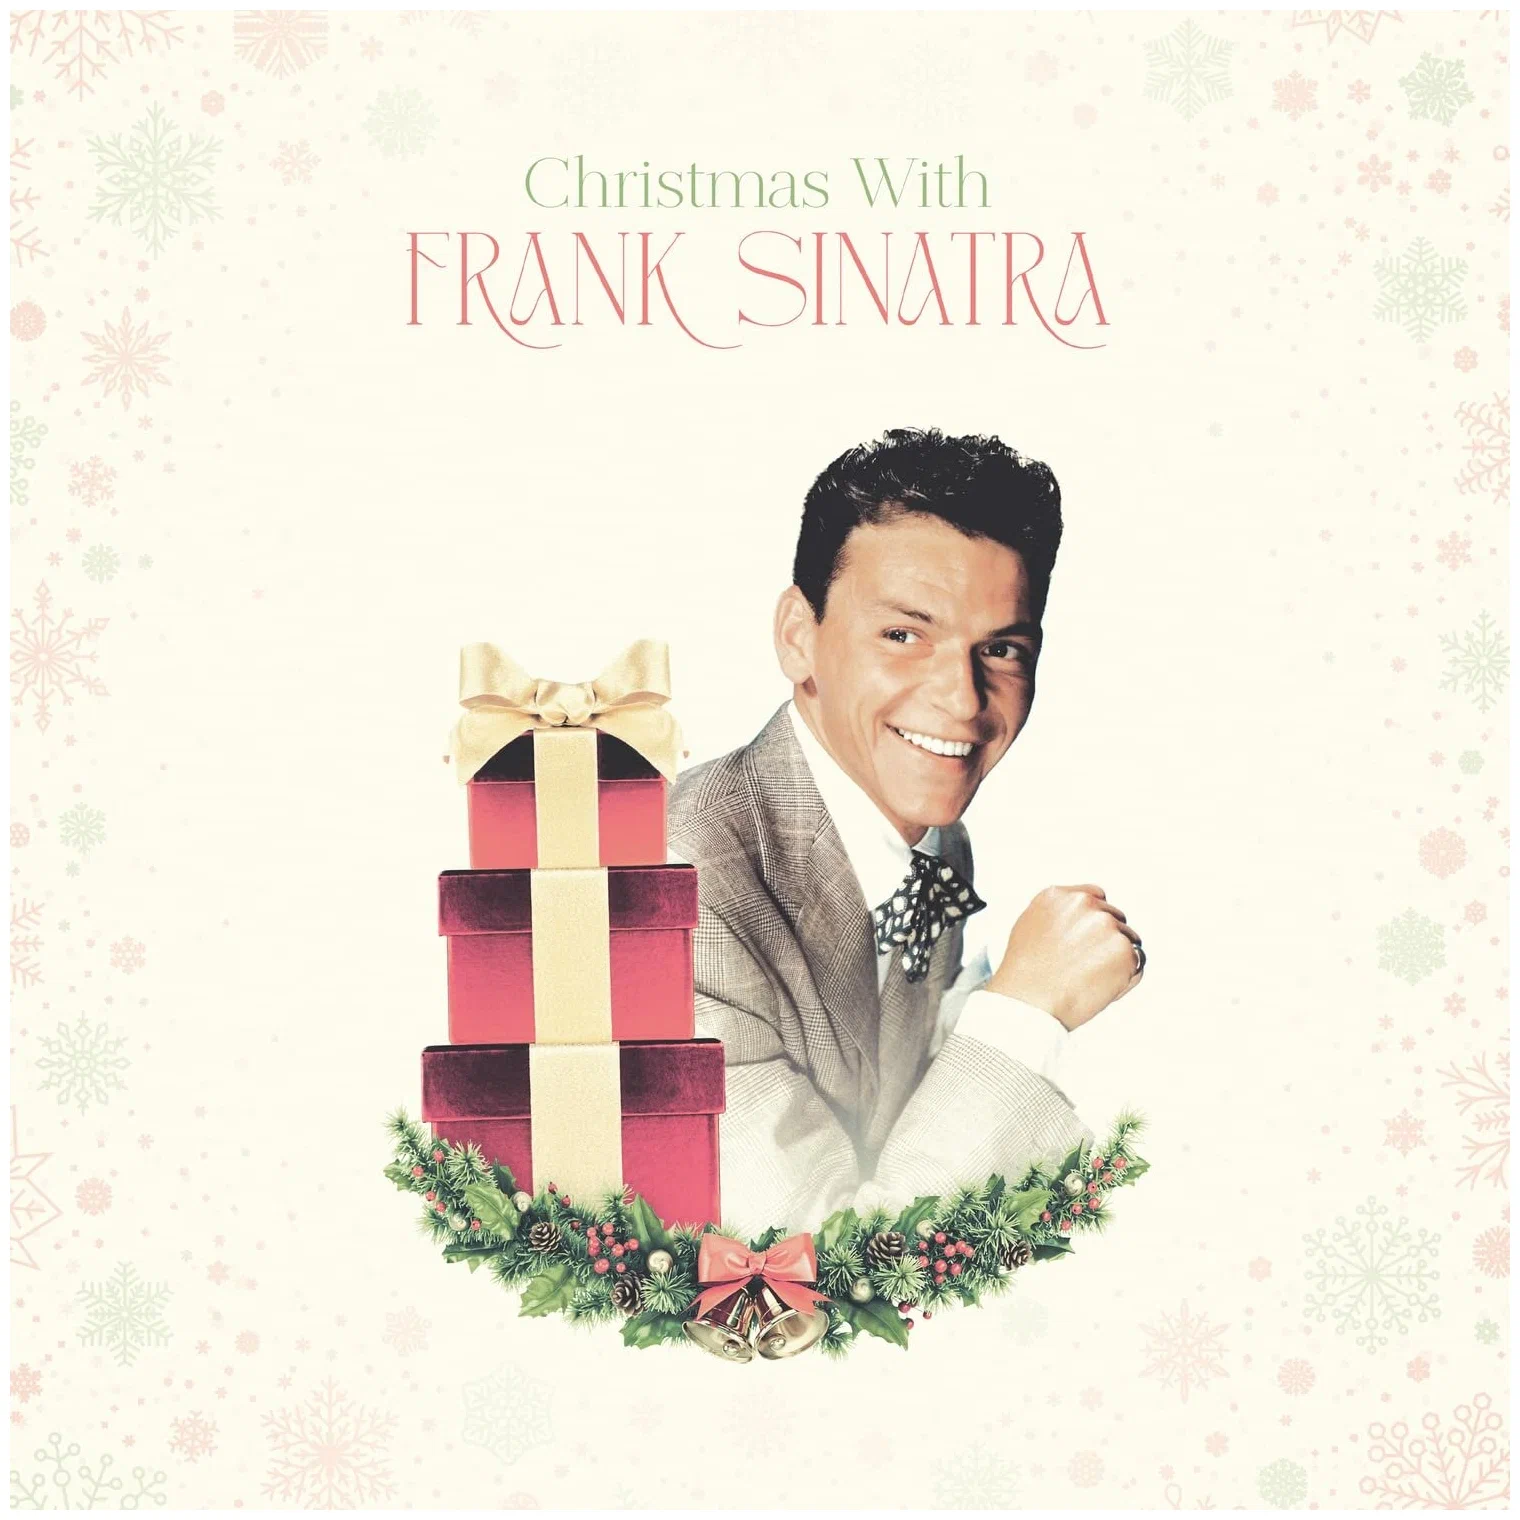 Frank Sinatra - Christmas With (LP)